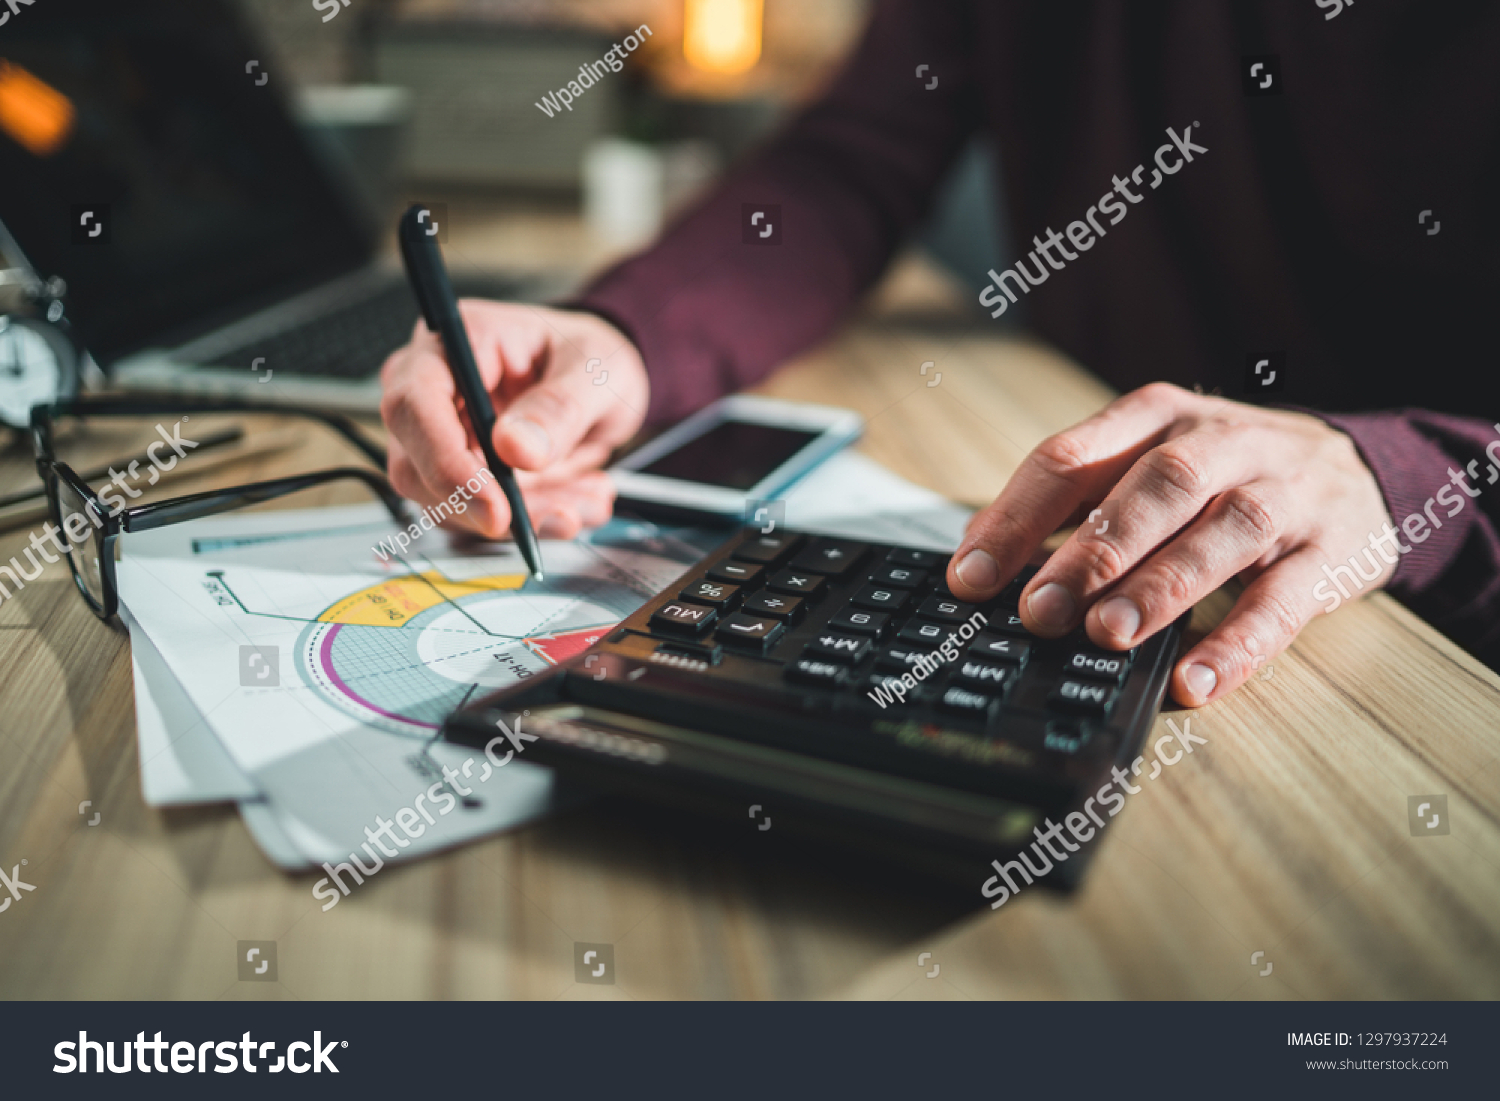 Male accountant working home making calculations. Savings, finance, economy concept.  #1297937224